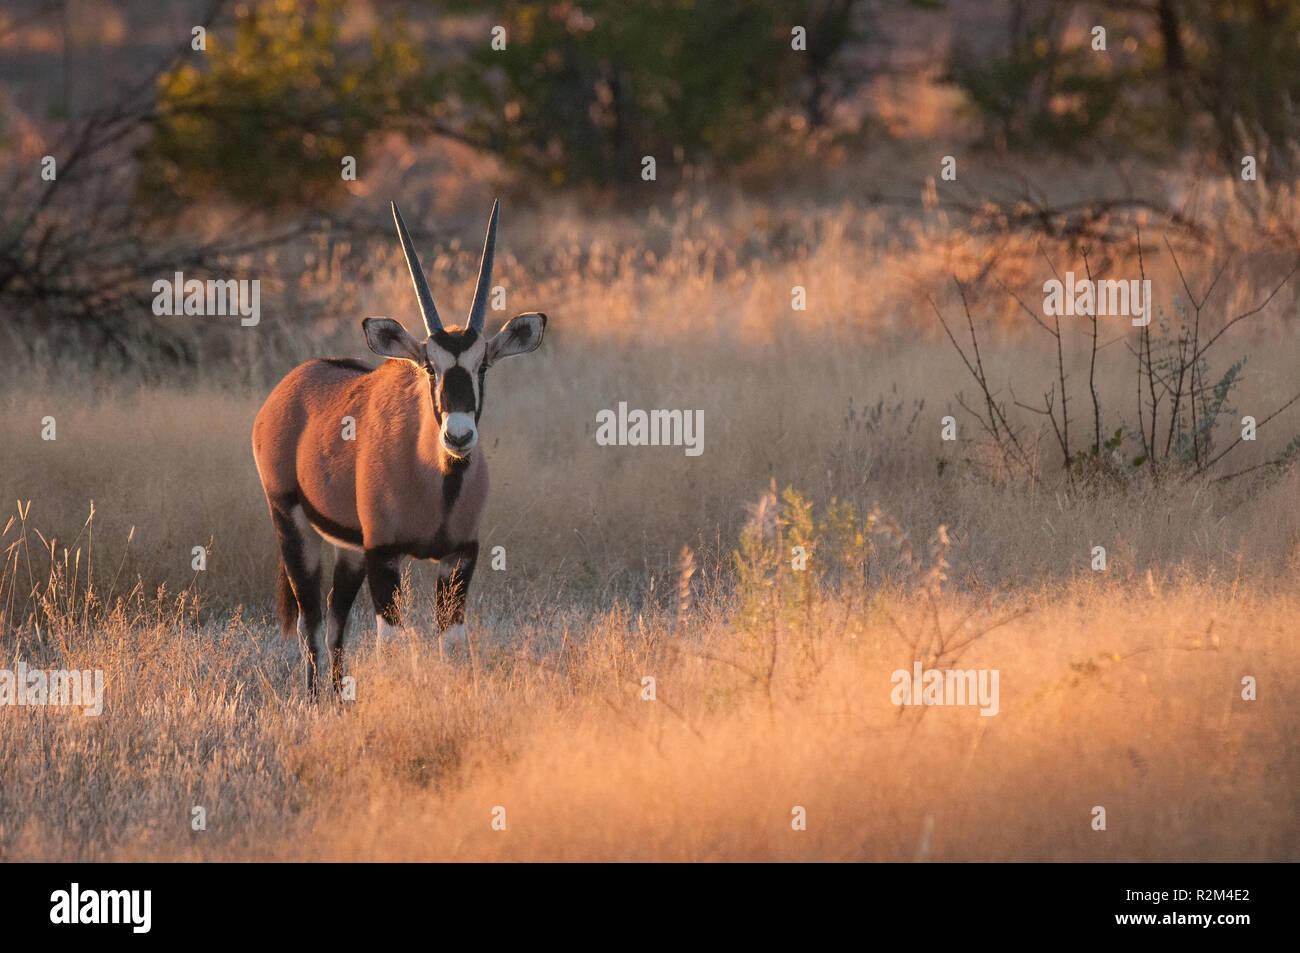 Young oryx in landscape Stock Photo